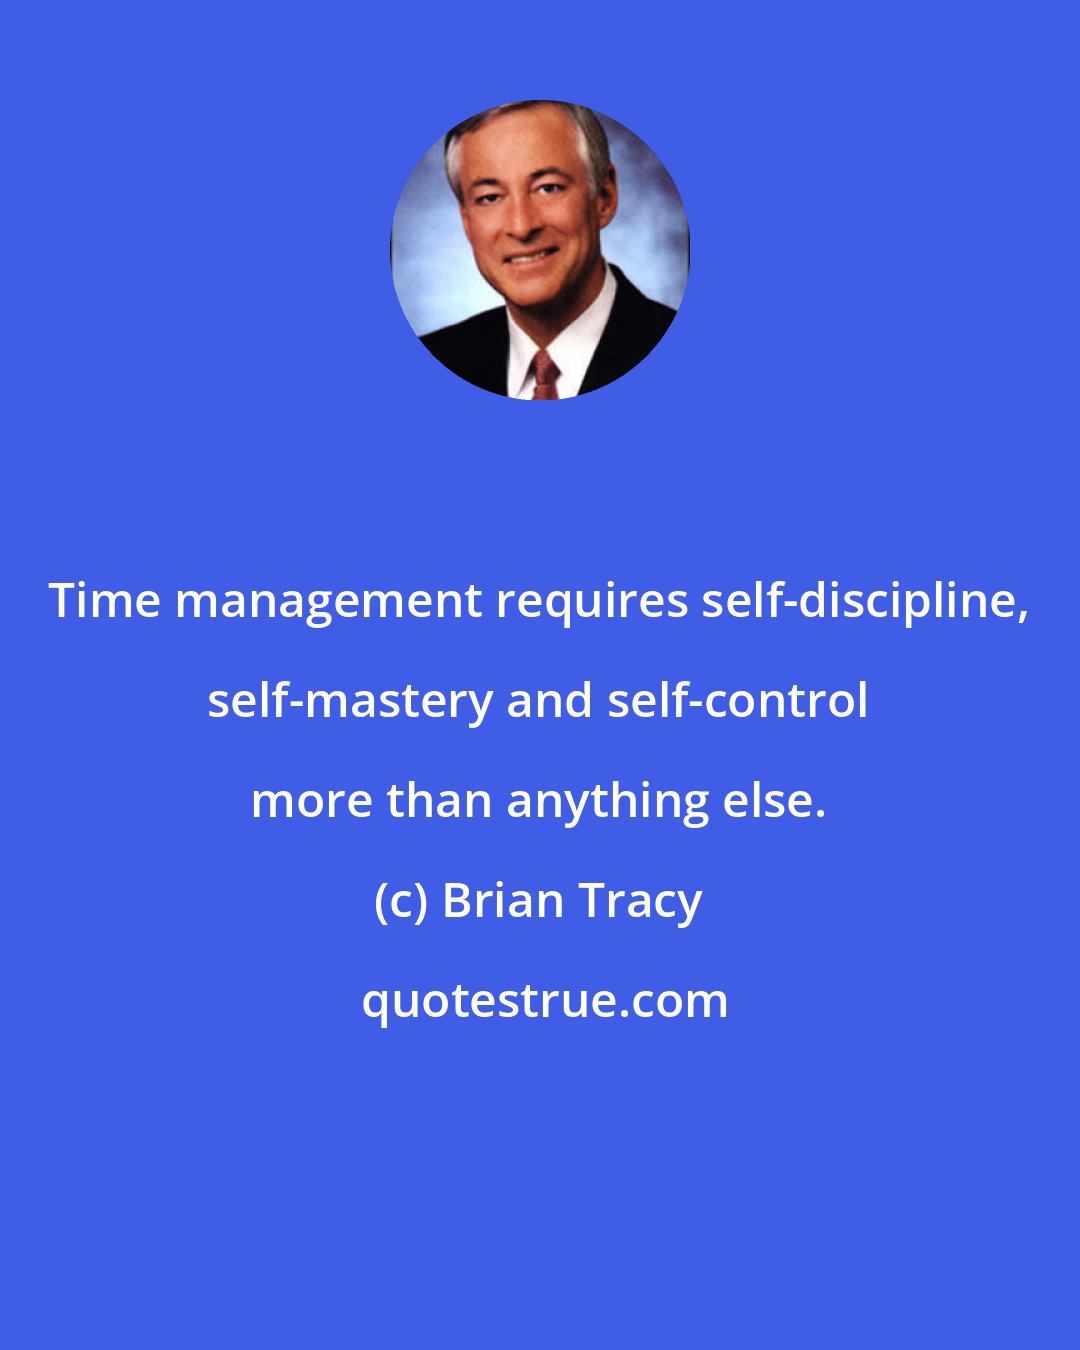 Brian Tracy: Time management requires self-discipline, self-mastery and self-control more than anything else.